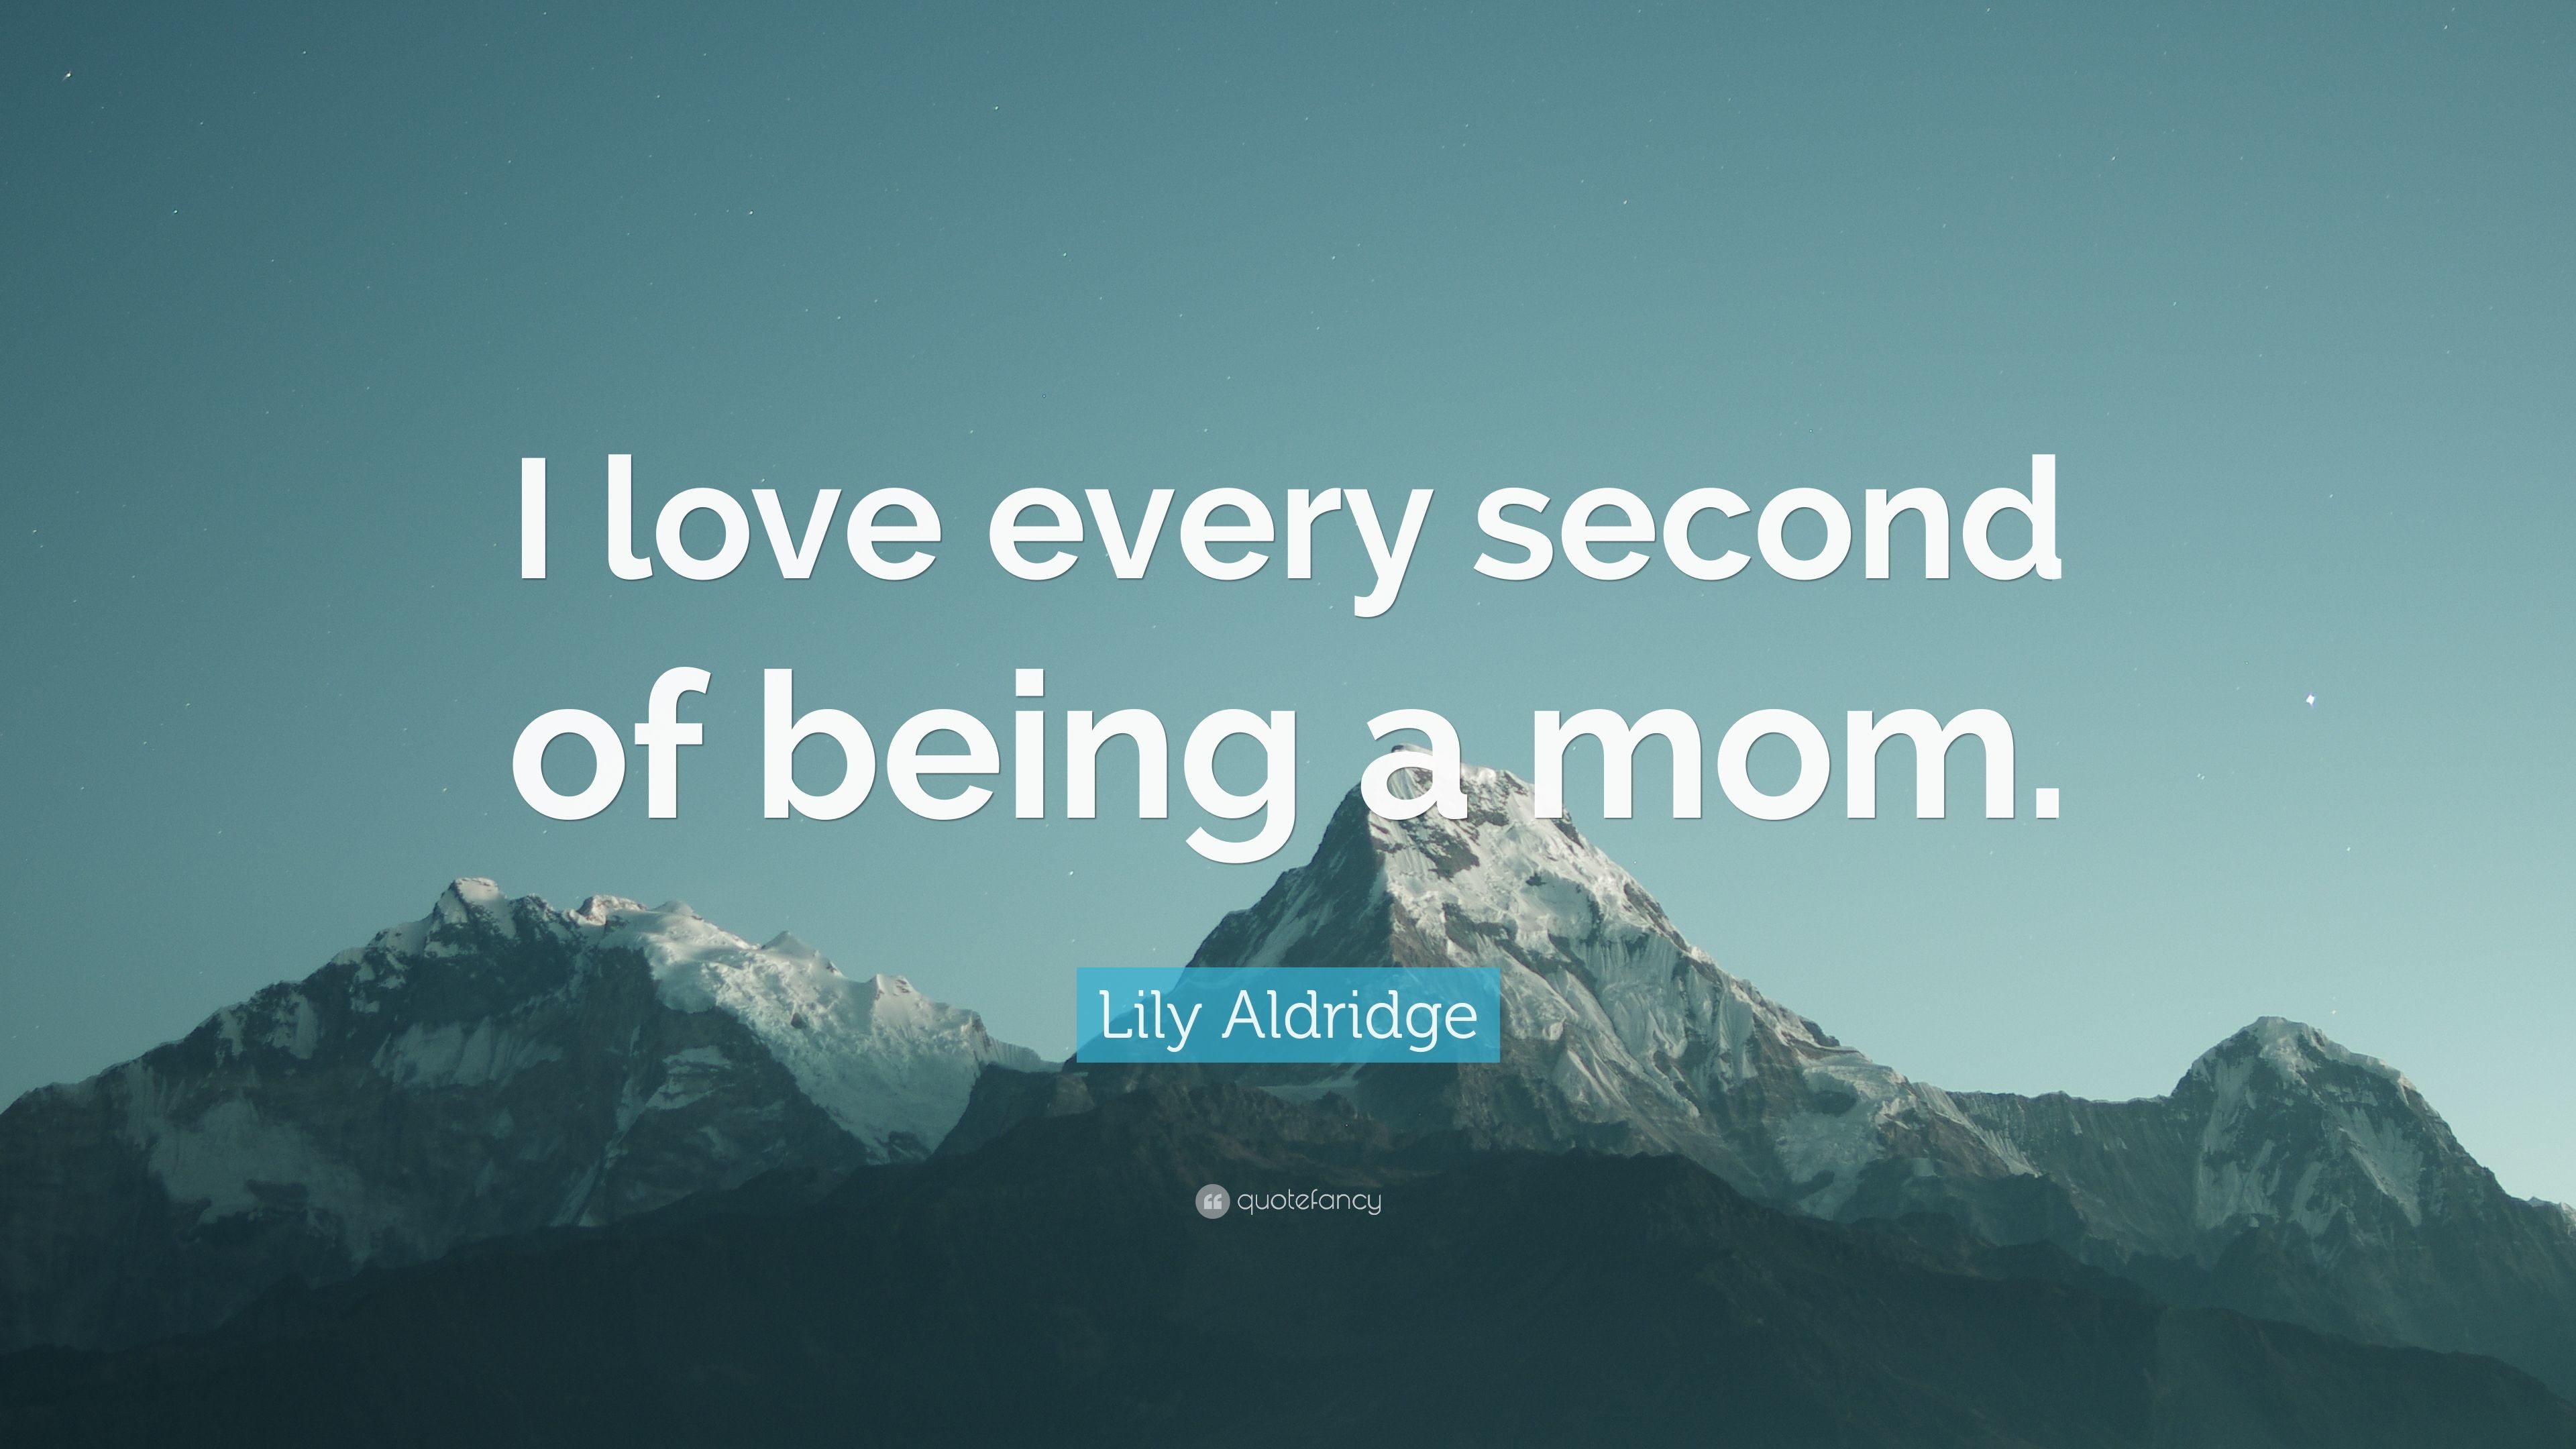 3840x2160 Lily Aldridge Quote: “I love every second of being a mom.”